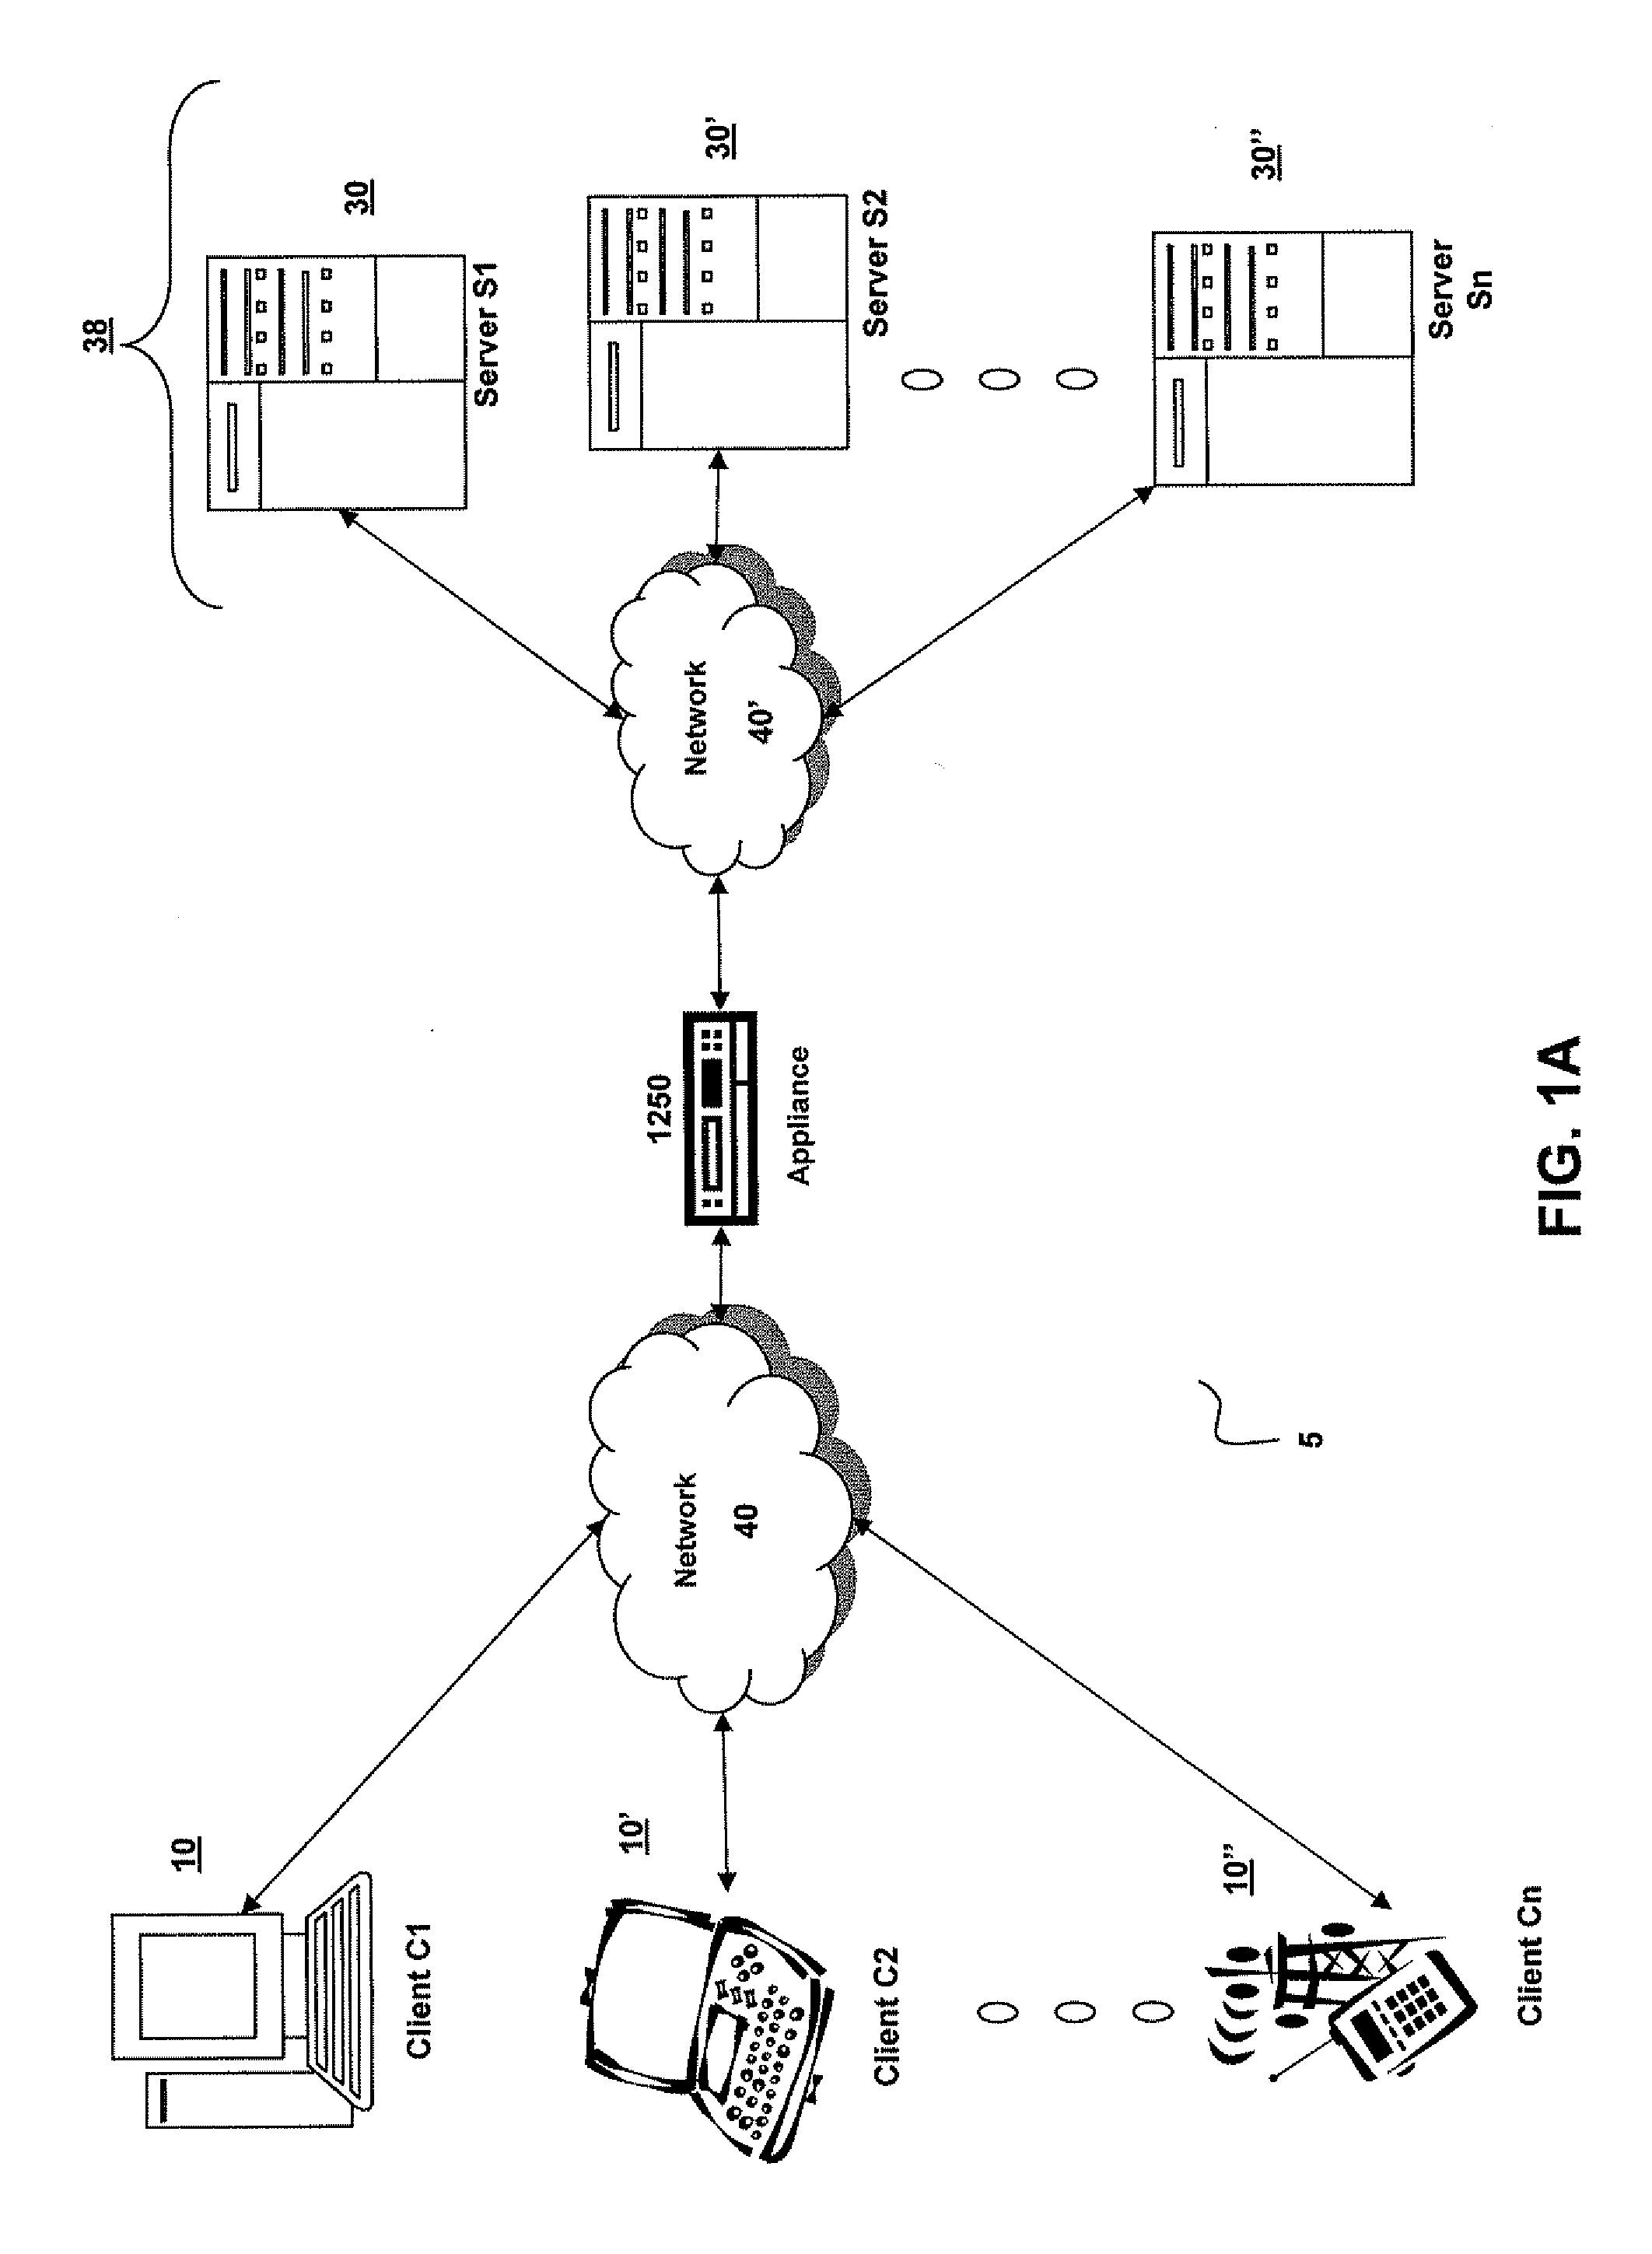 Systems and Methods for Accelerating Delivery of a Computing Environment to a Remote User